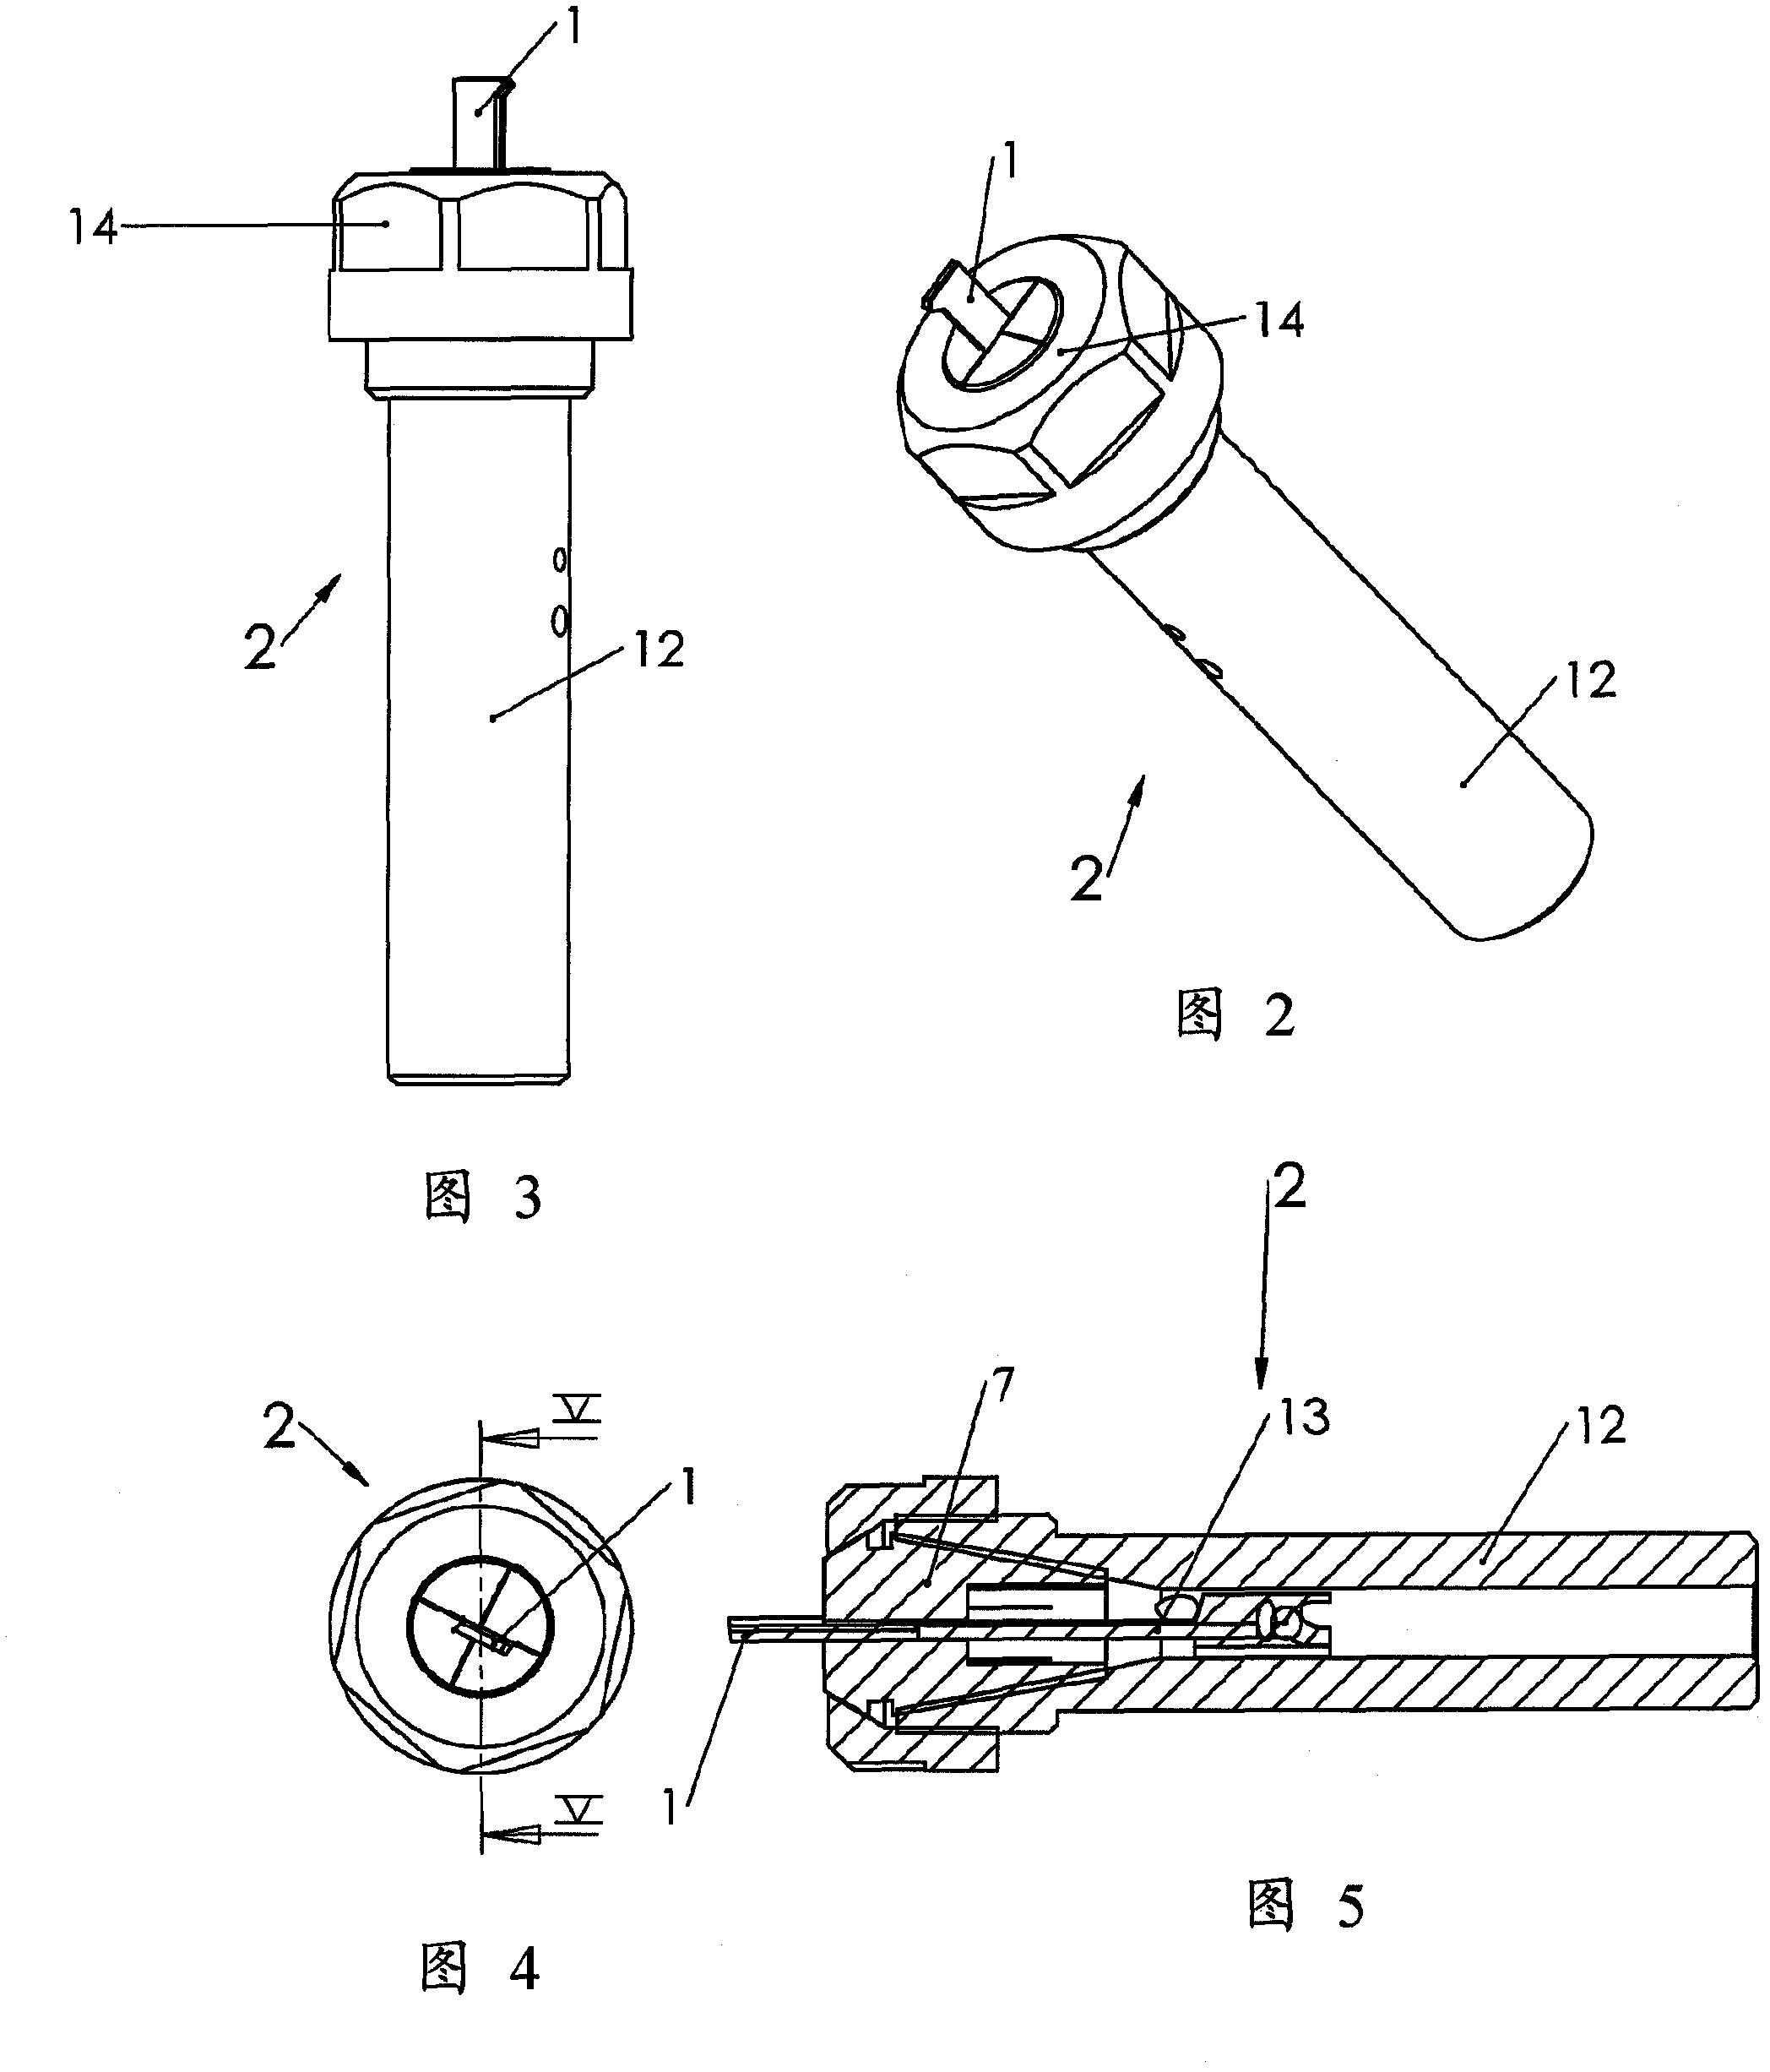 Planar cutting tool and associated tool holder